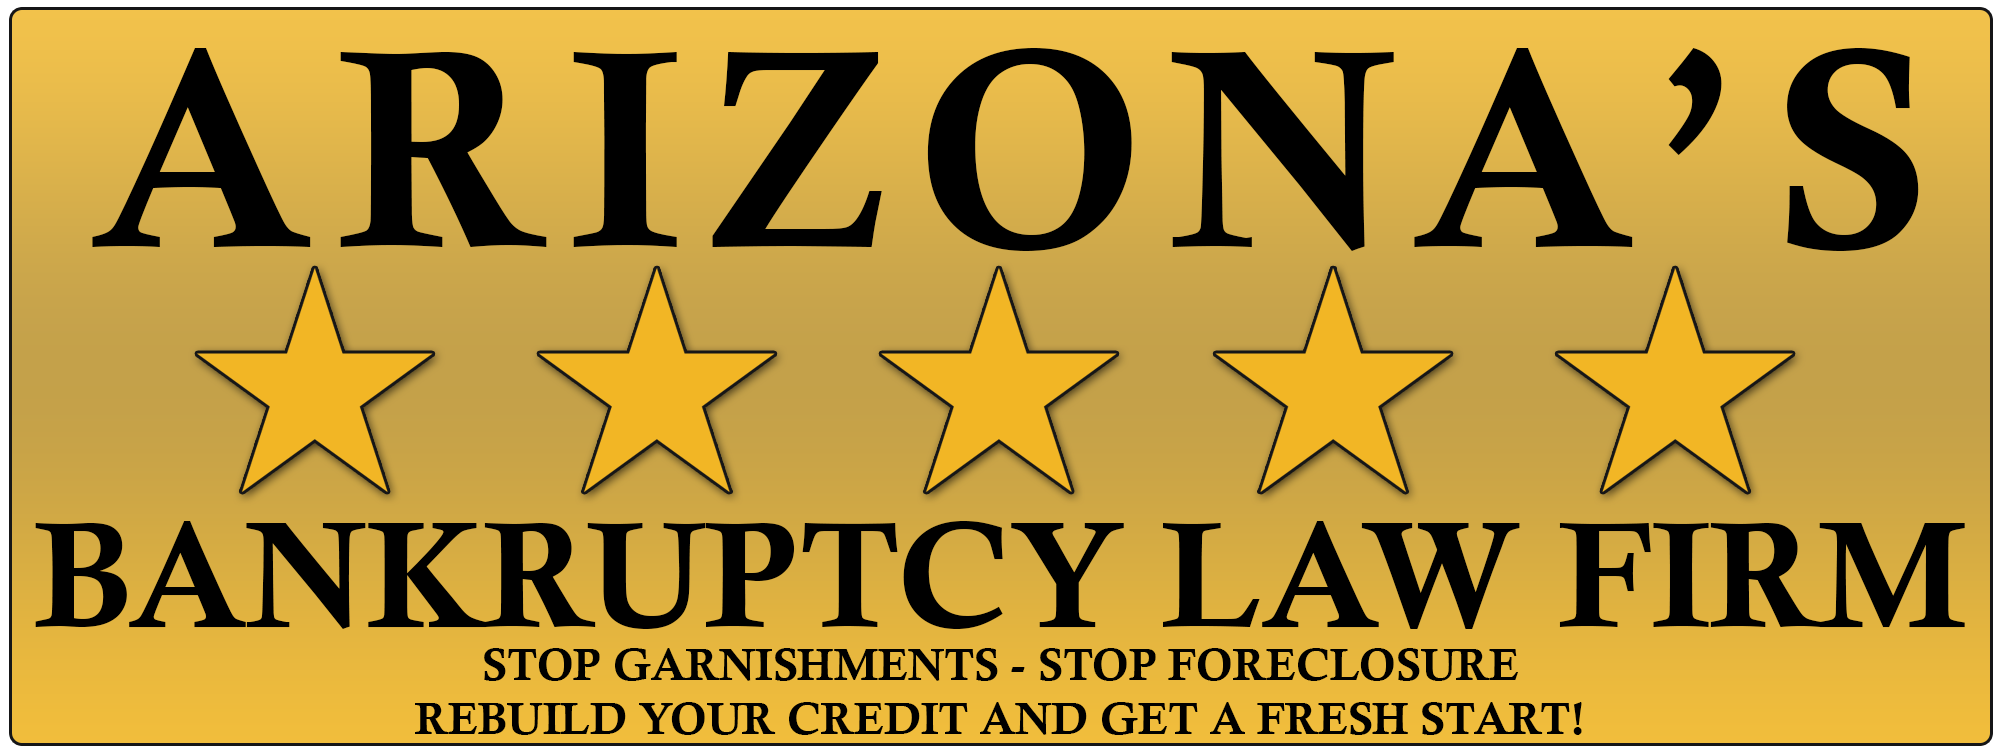 Arizona's Bankruptcy Law Firm